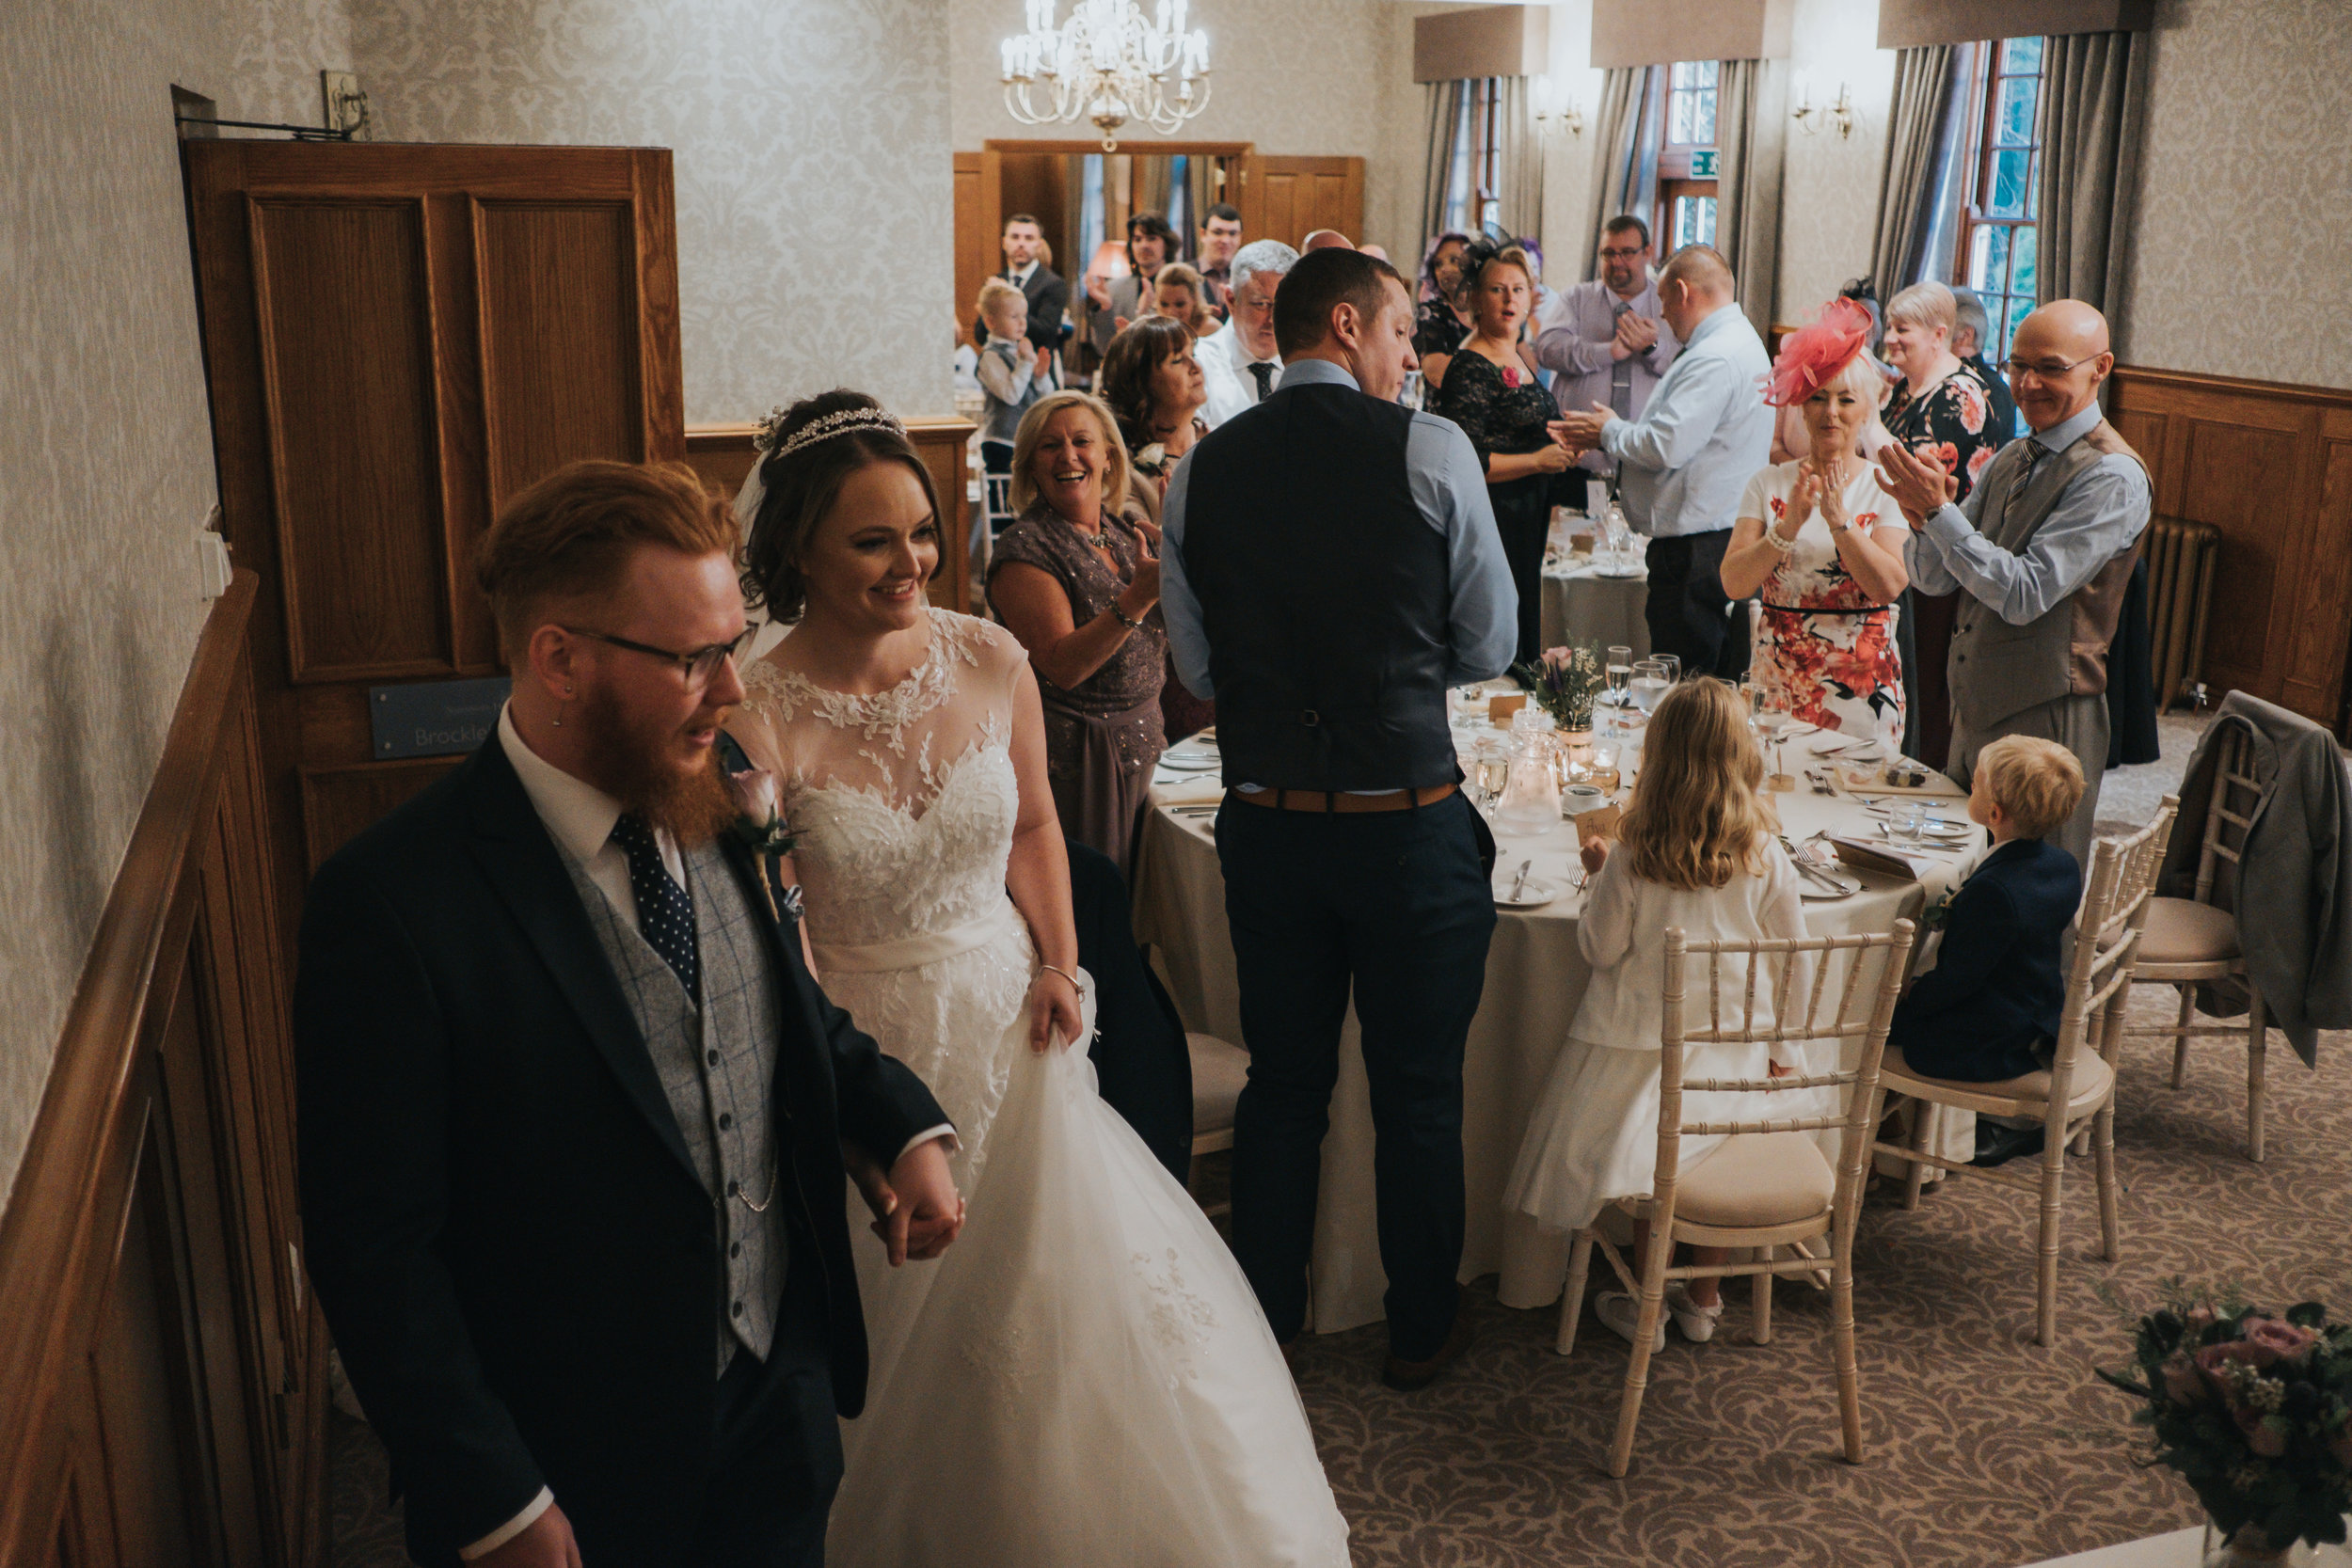 Vicky and Lee Wedding (394 of 590)-nunsmere hall wedding photographer in cheshire documentry wedding photography north west england.jpg